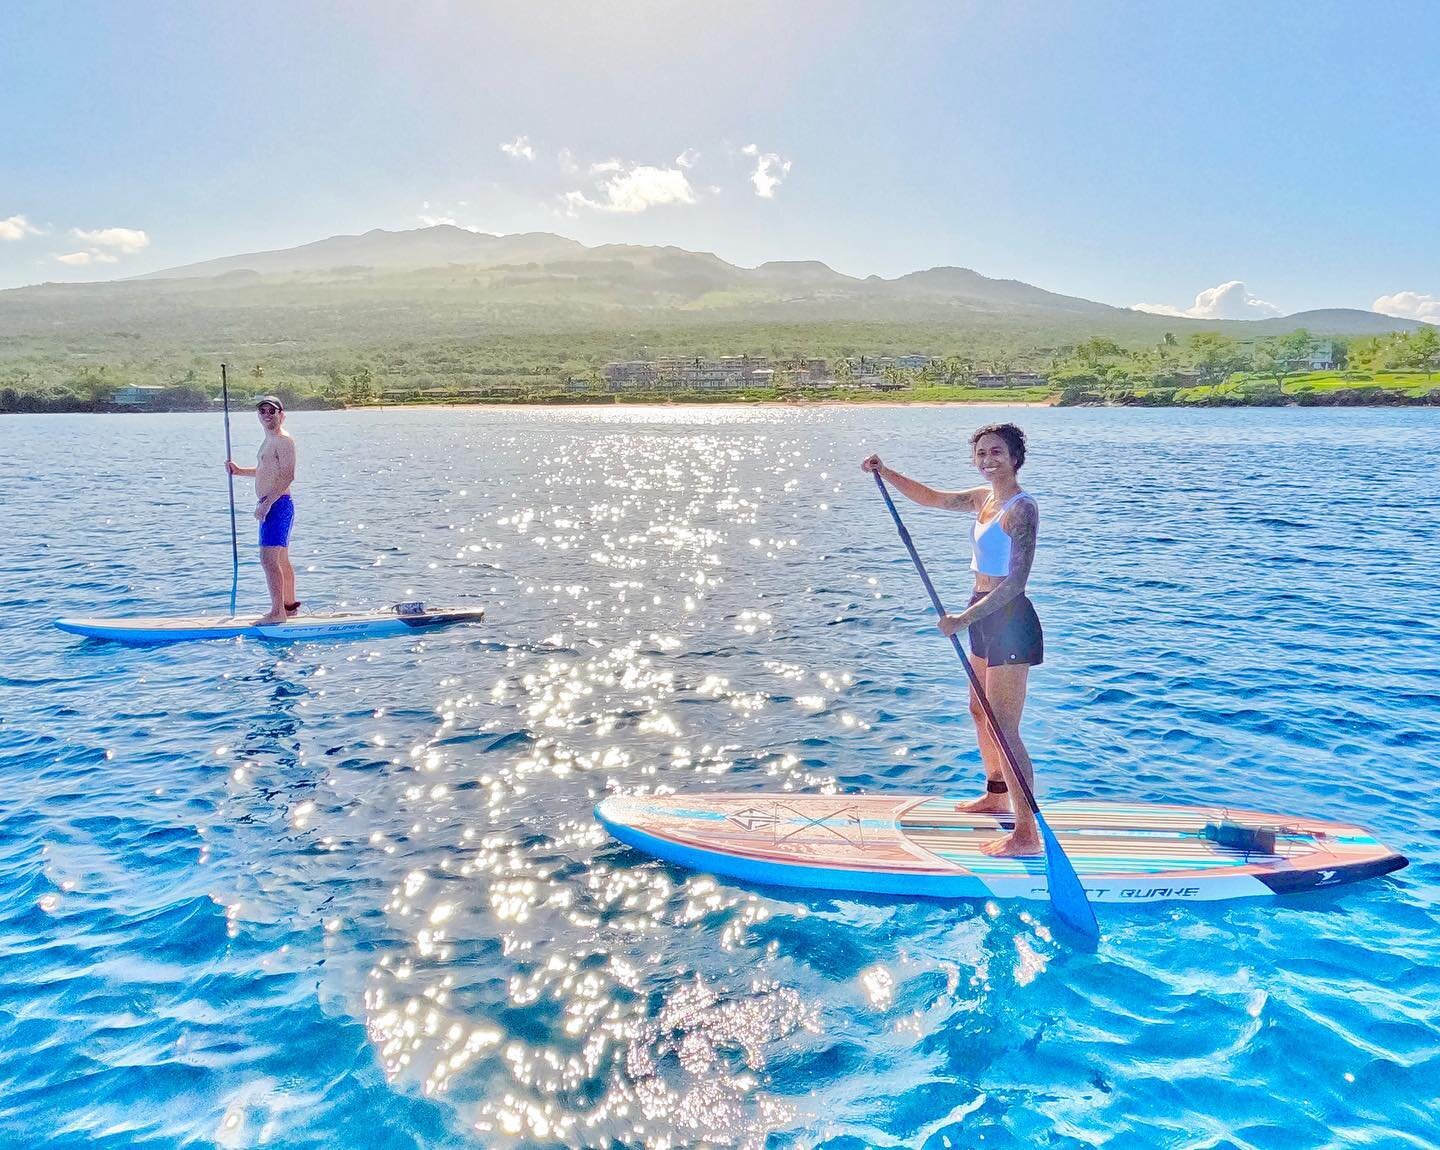 🌋 Check out this gorgeous view of Haleakalā (Maui&rsquo;s dormant volcano) from the Au&rsquo;au Channel! It was the most epic day paddling the coastline with Christina &amp; Ryan from San Diego!! 😎

#maui #mauihawaii #hawaii #mauitours #mauiactivit